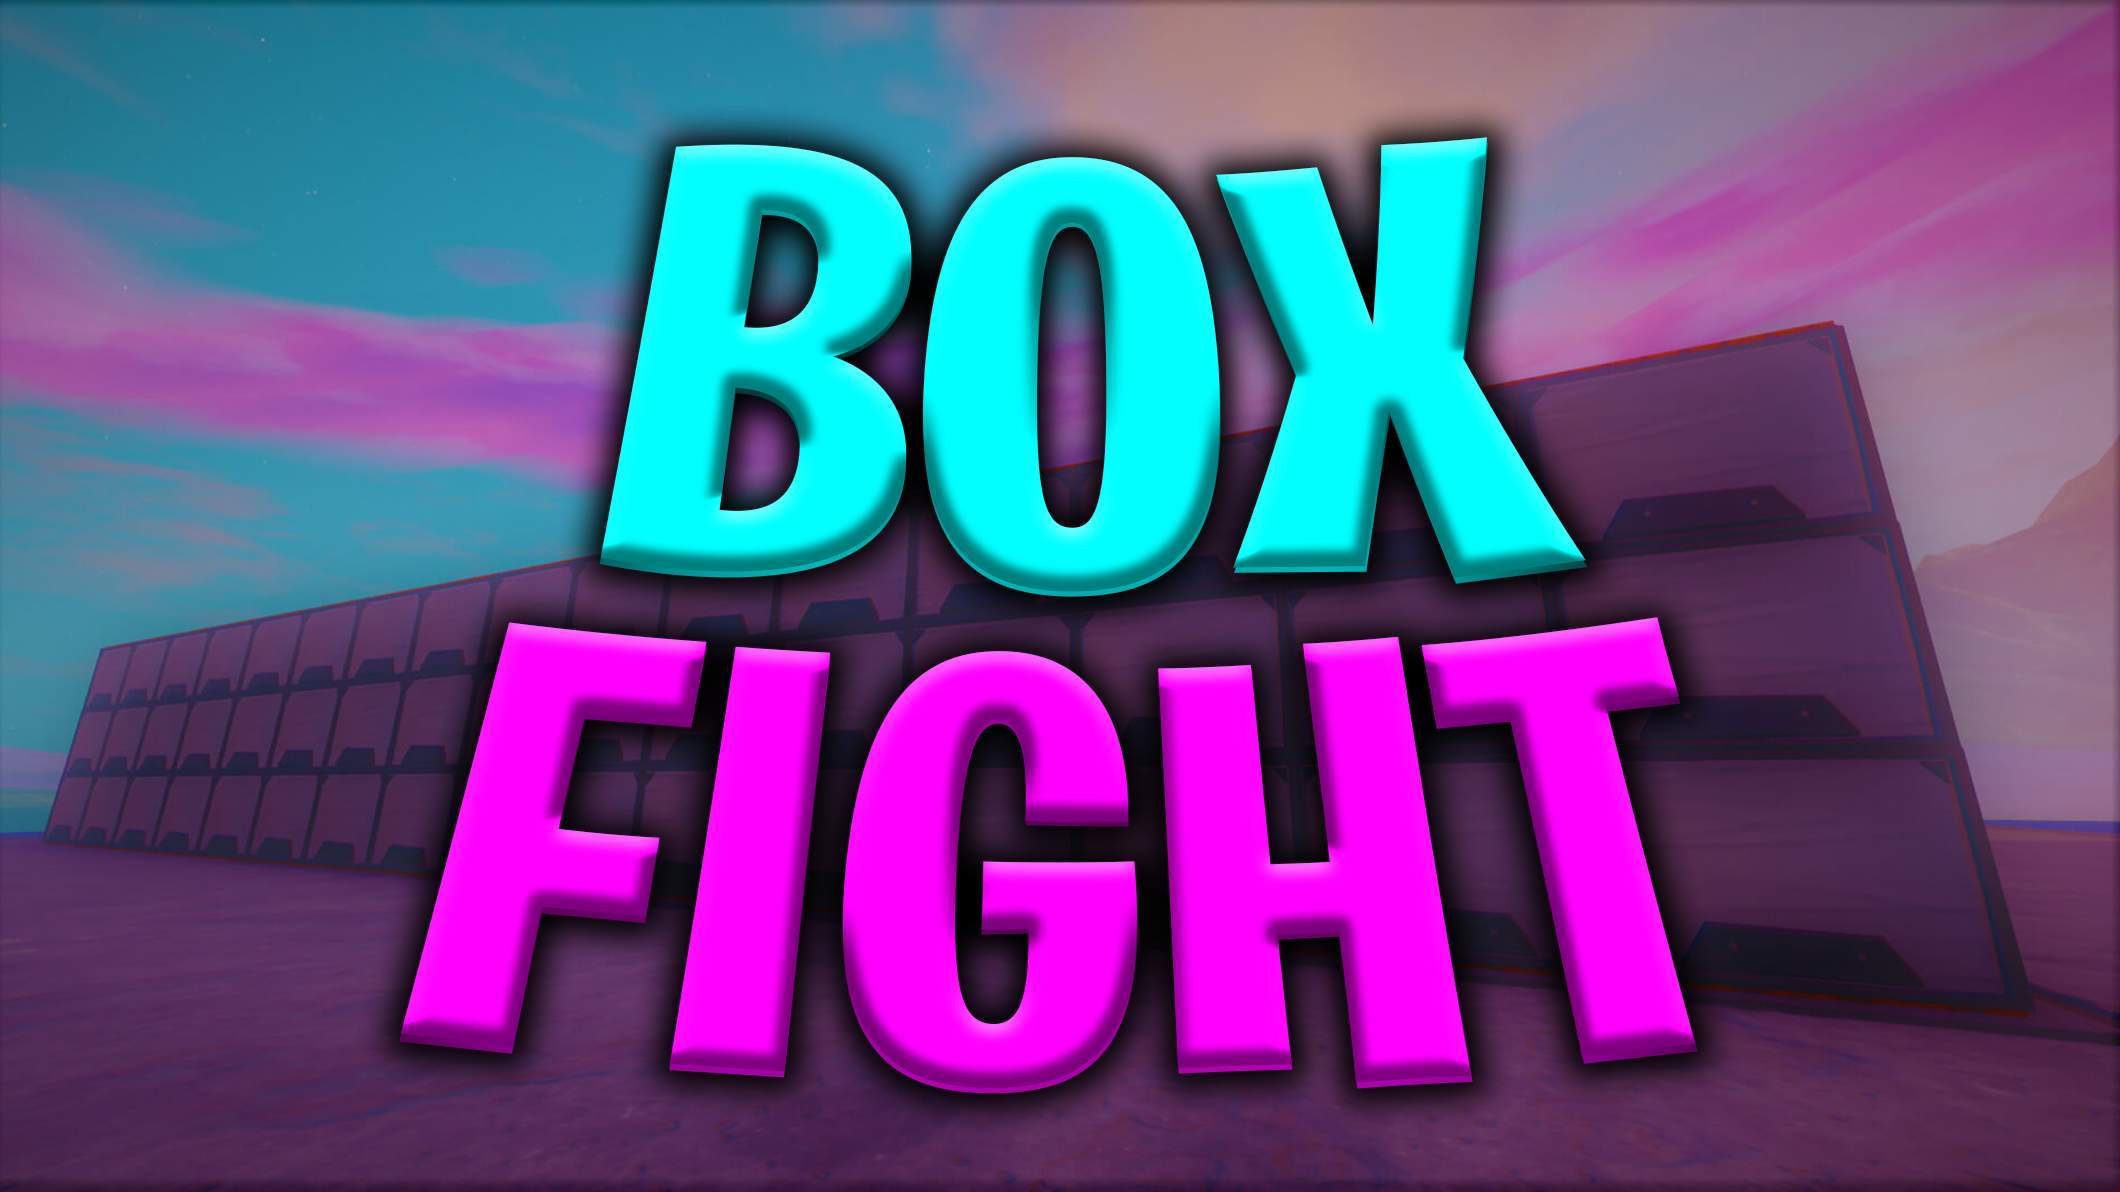 ⭐ INCRAFTER'S BOX FIGHTS